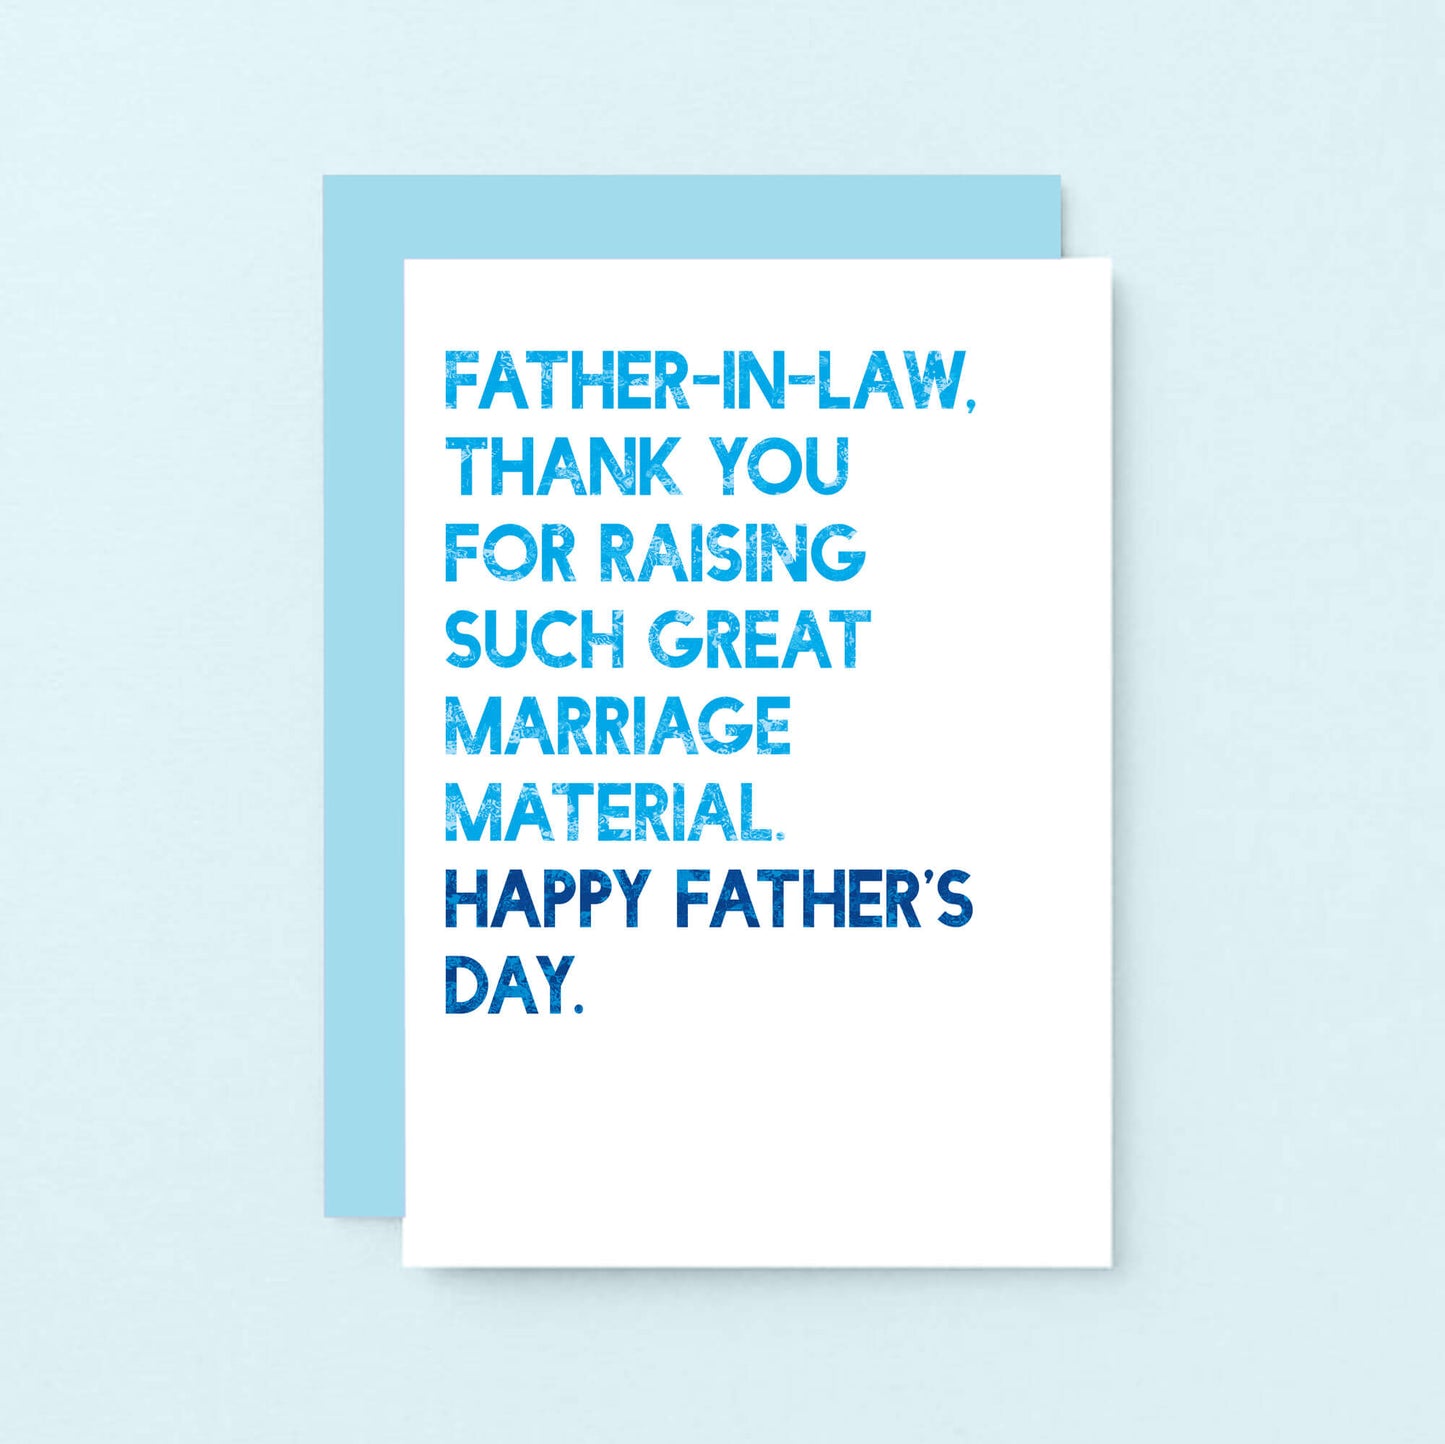 Father's Day Card by SixElevenCreations. Reads Father-in-Law, thank you for raising such great marriage material. Happy Father's Day. Product Code SEF0033A6